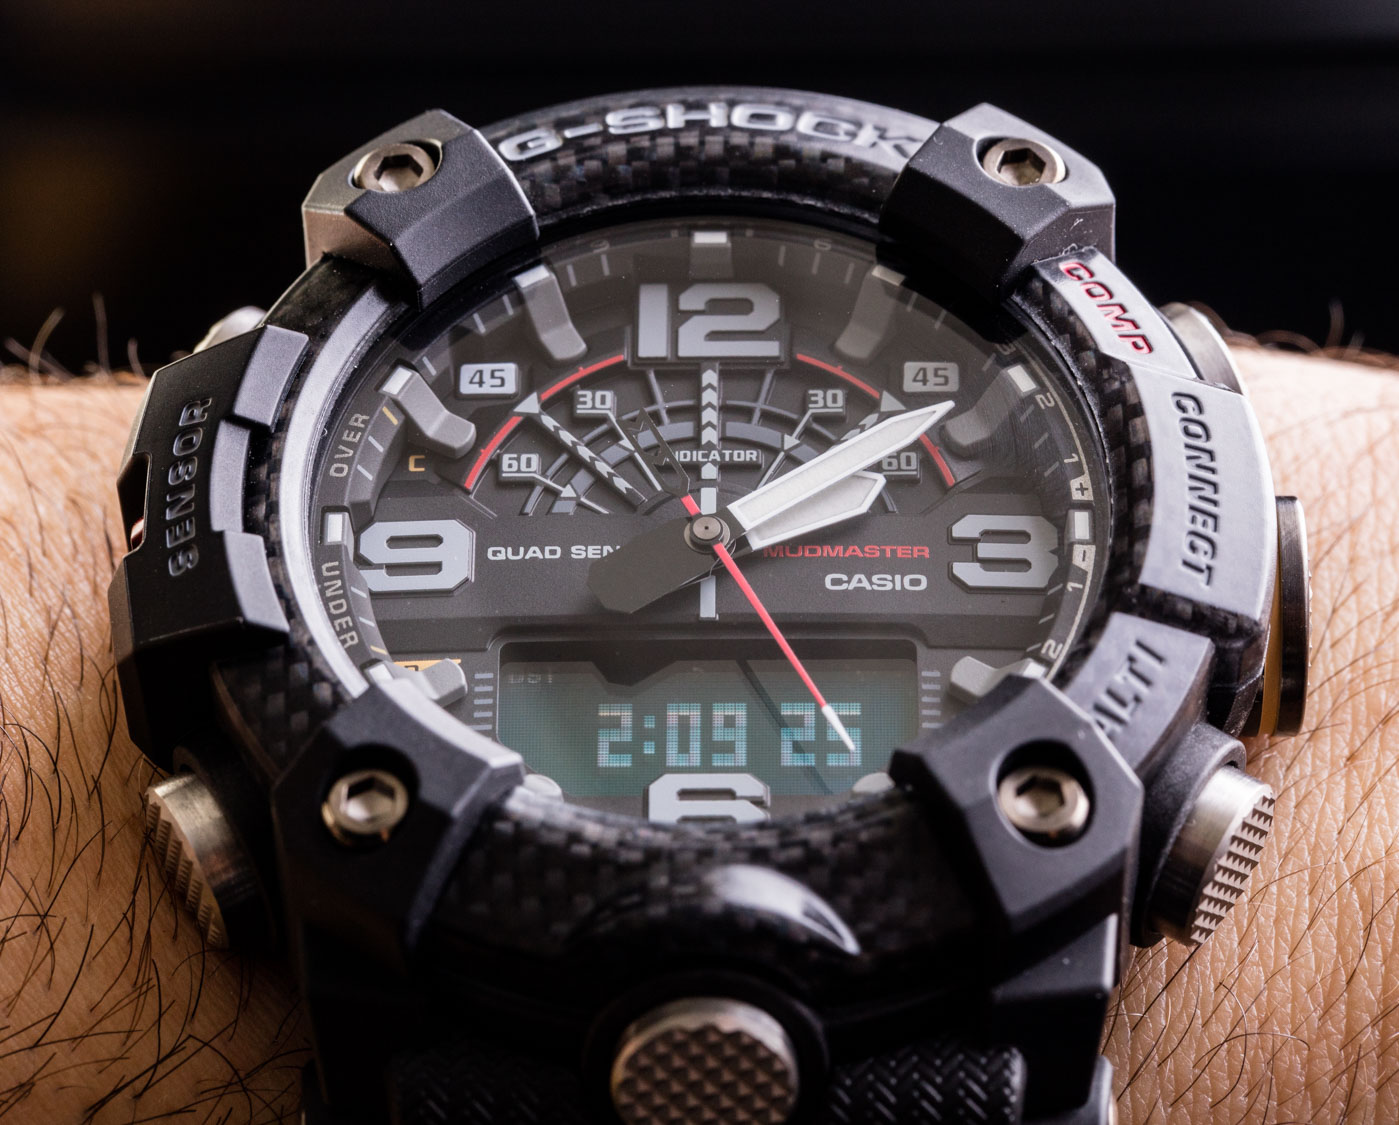 Casio G-Shock Mudmaster GG-B100 Watch Review: Full Of Style, Value, Features